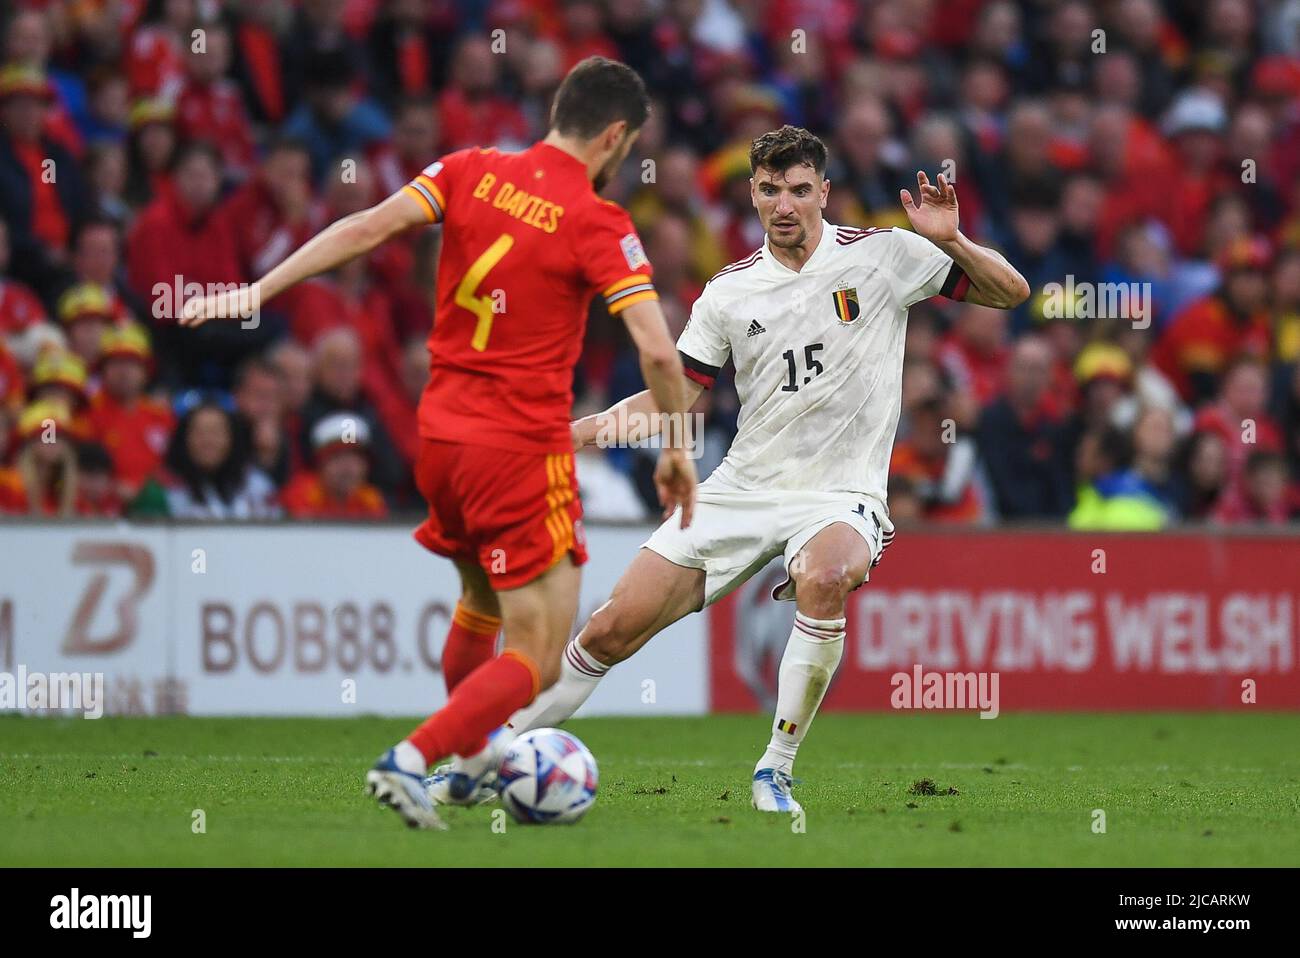 Cardiff, UK. 11th June, 2022. Ben Davies of Wales, tackled by Thomas Meunier of Belgium, Credit: News Images /Alamy Live News Stock Photo